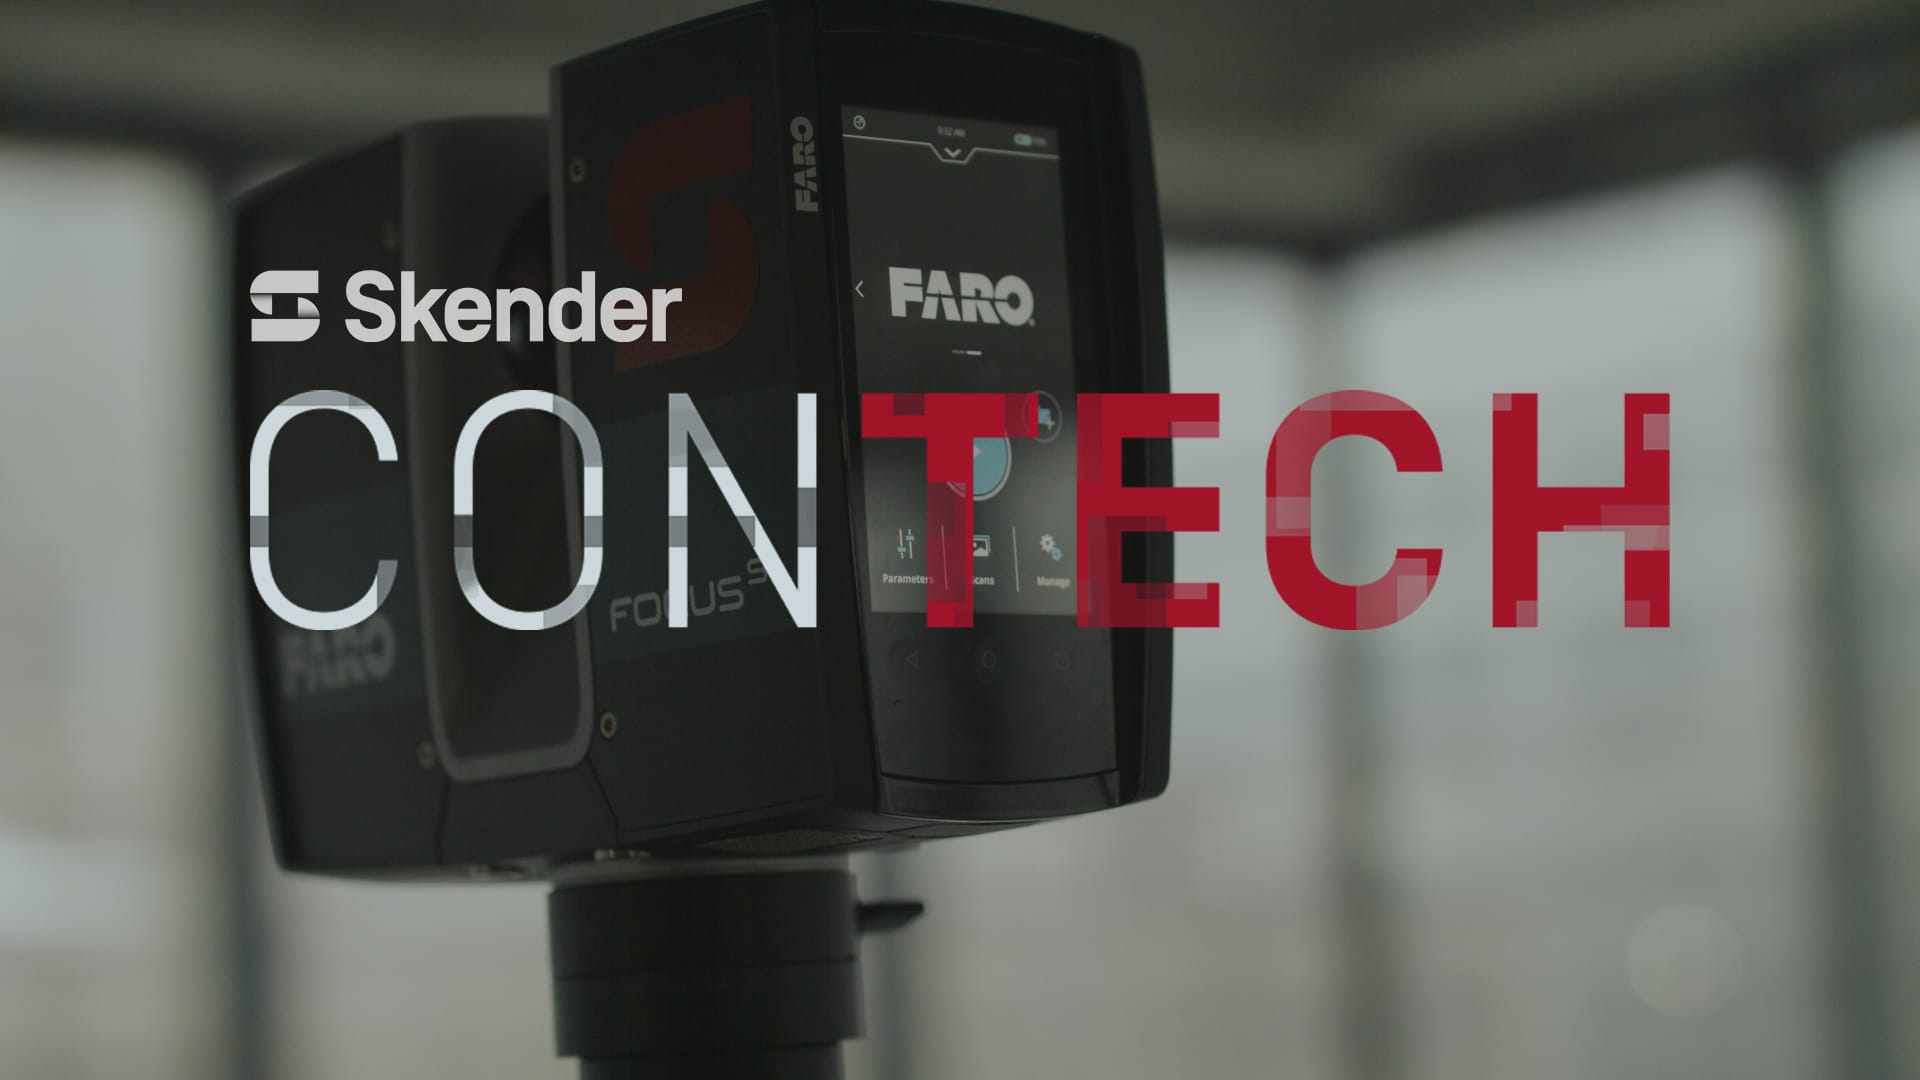 Experience Skender ConTech